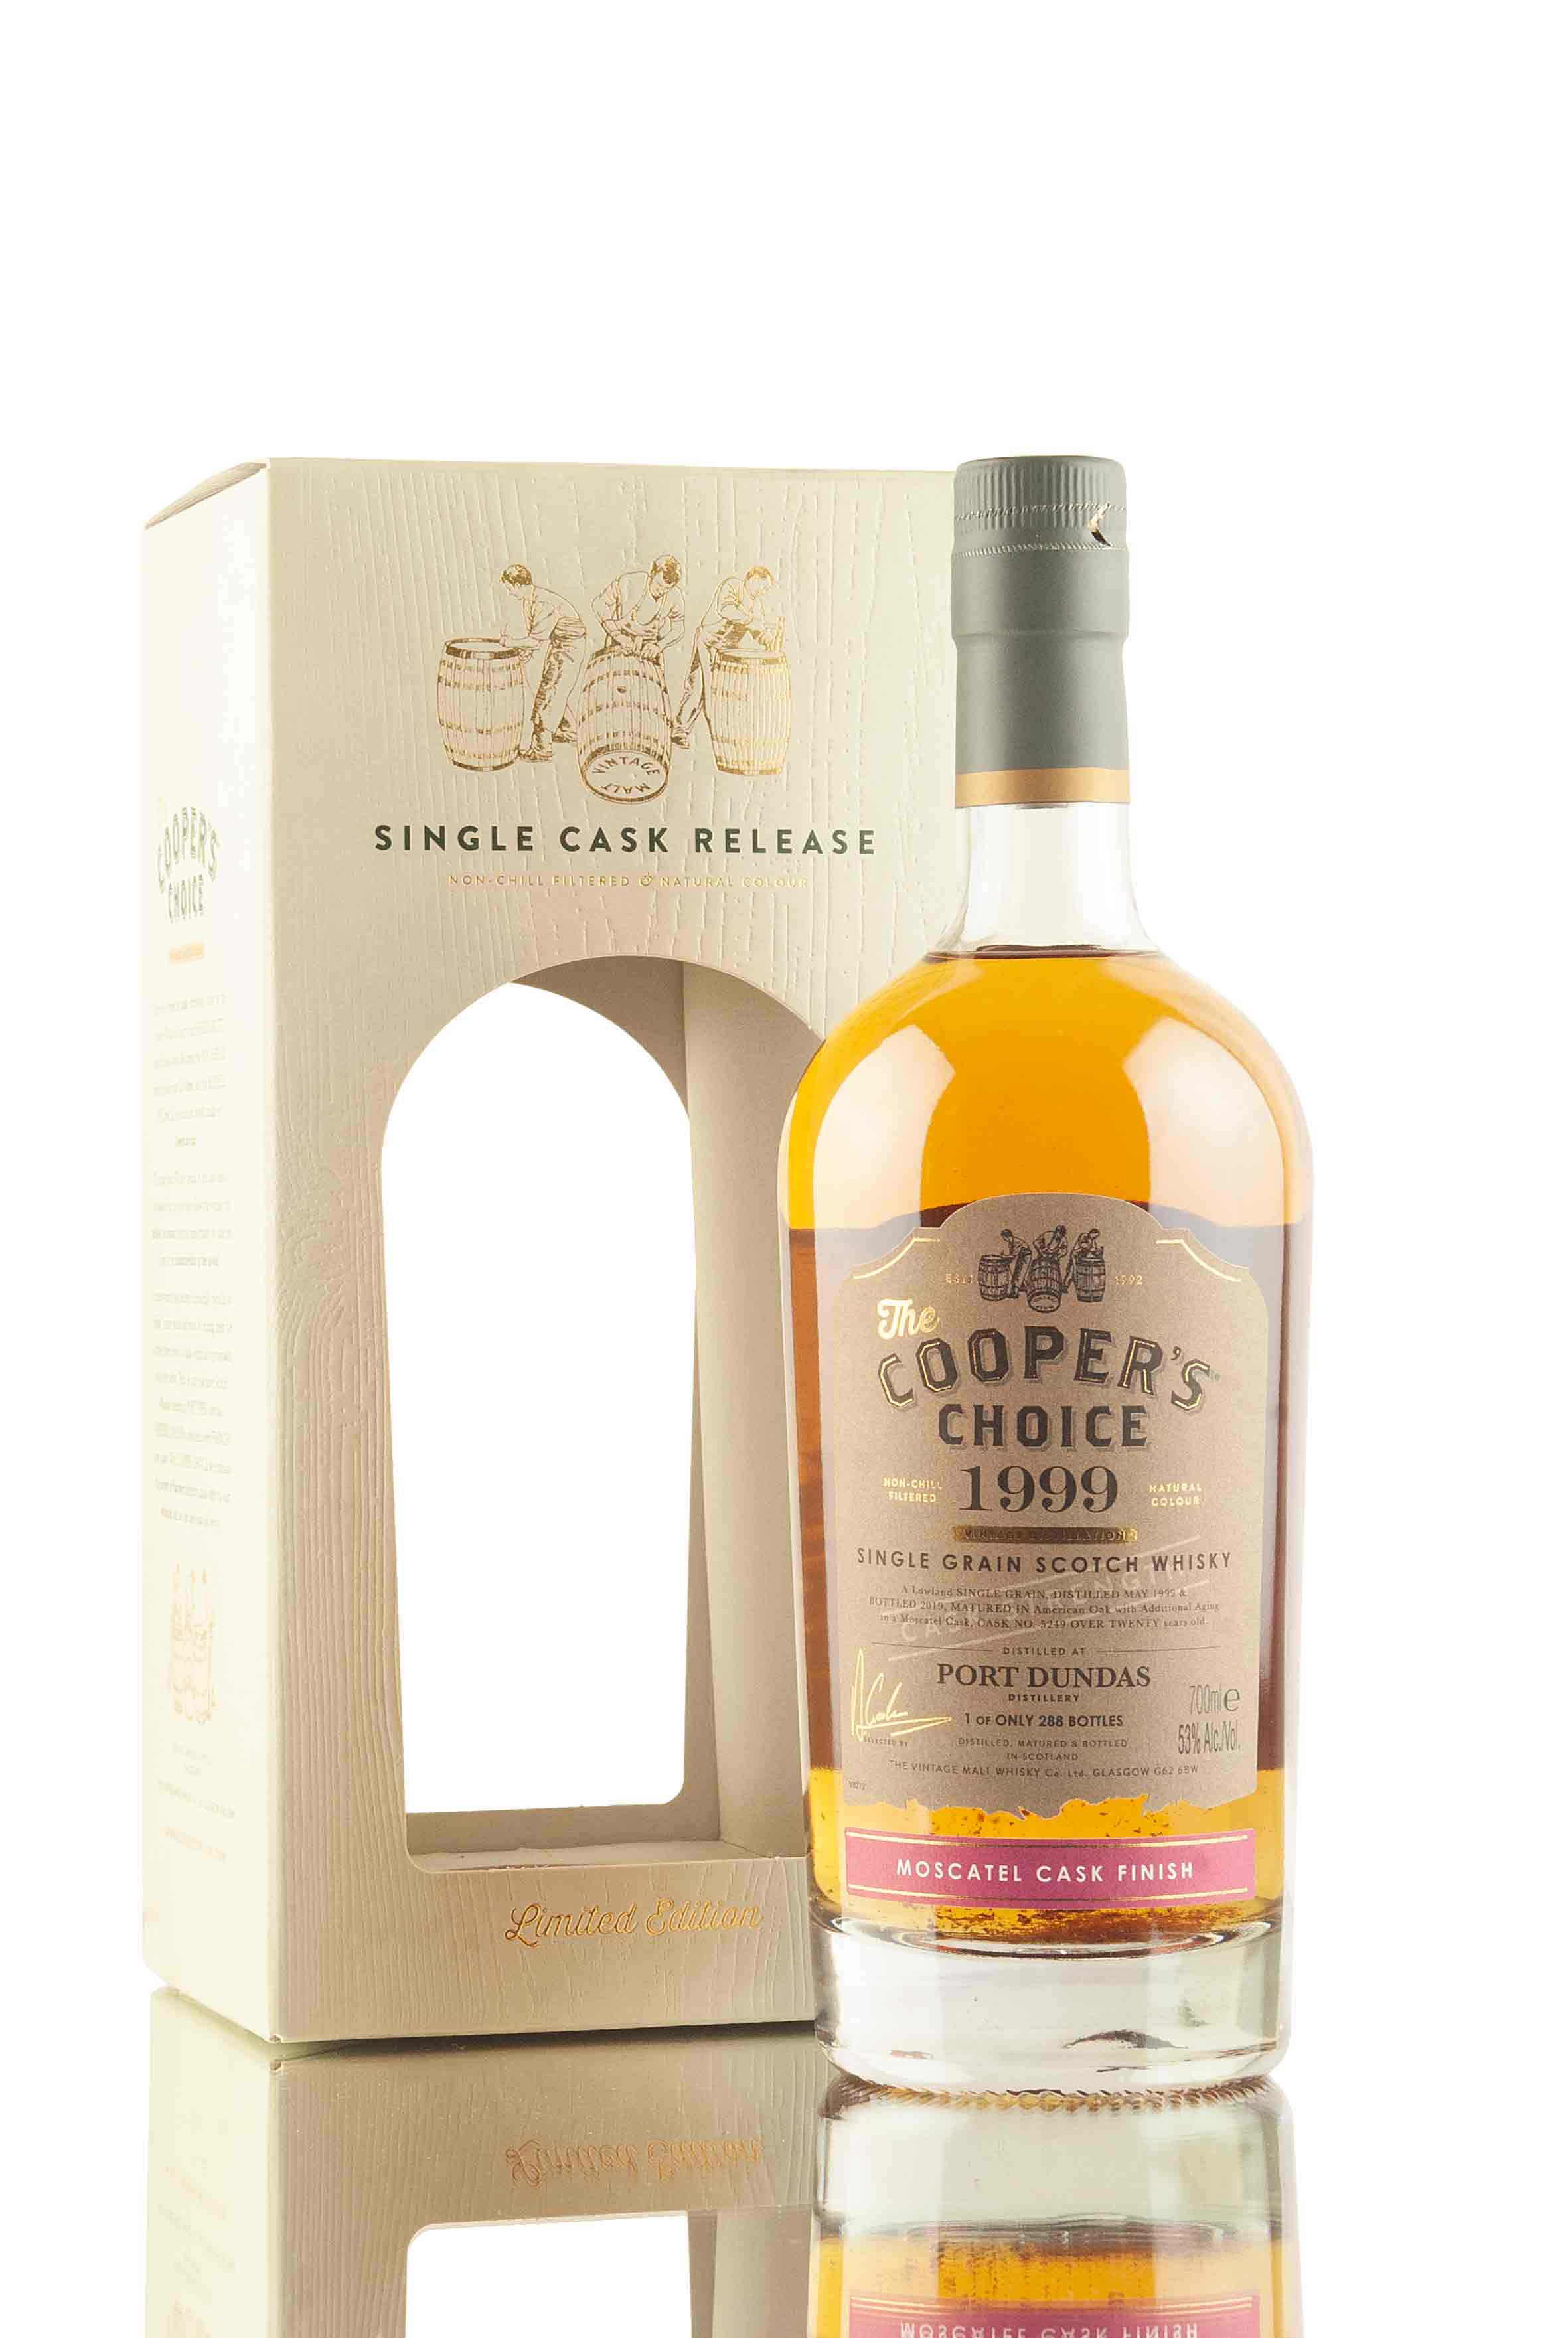 Port Dundas 20 Year Old - 1999 | Cask 5249 | The Cooper's Choice | Abbey Whisky